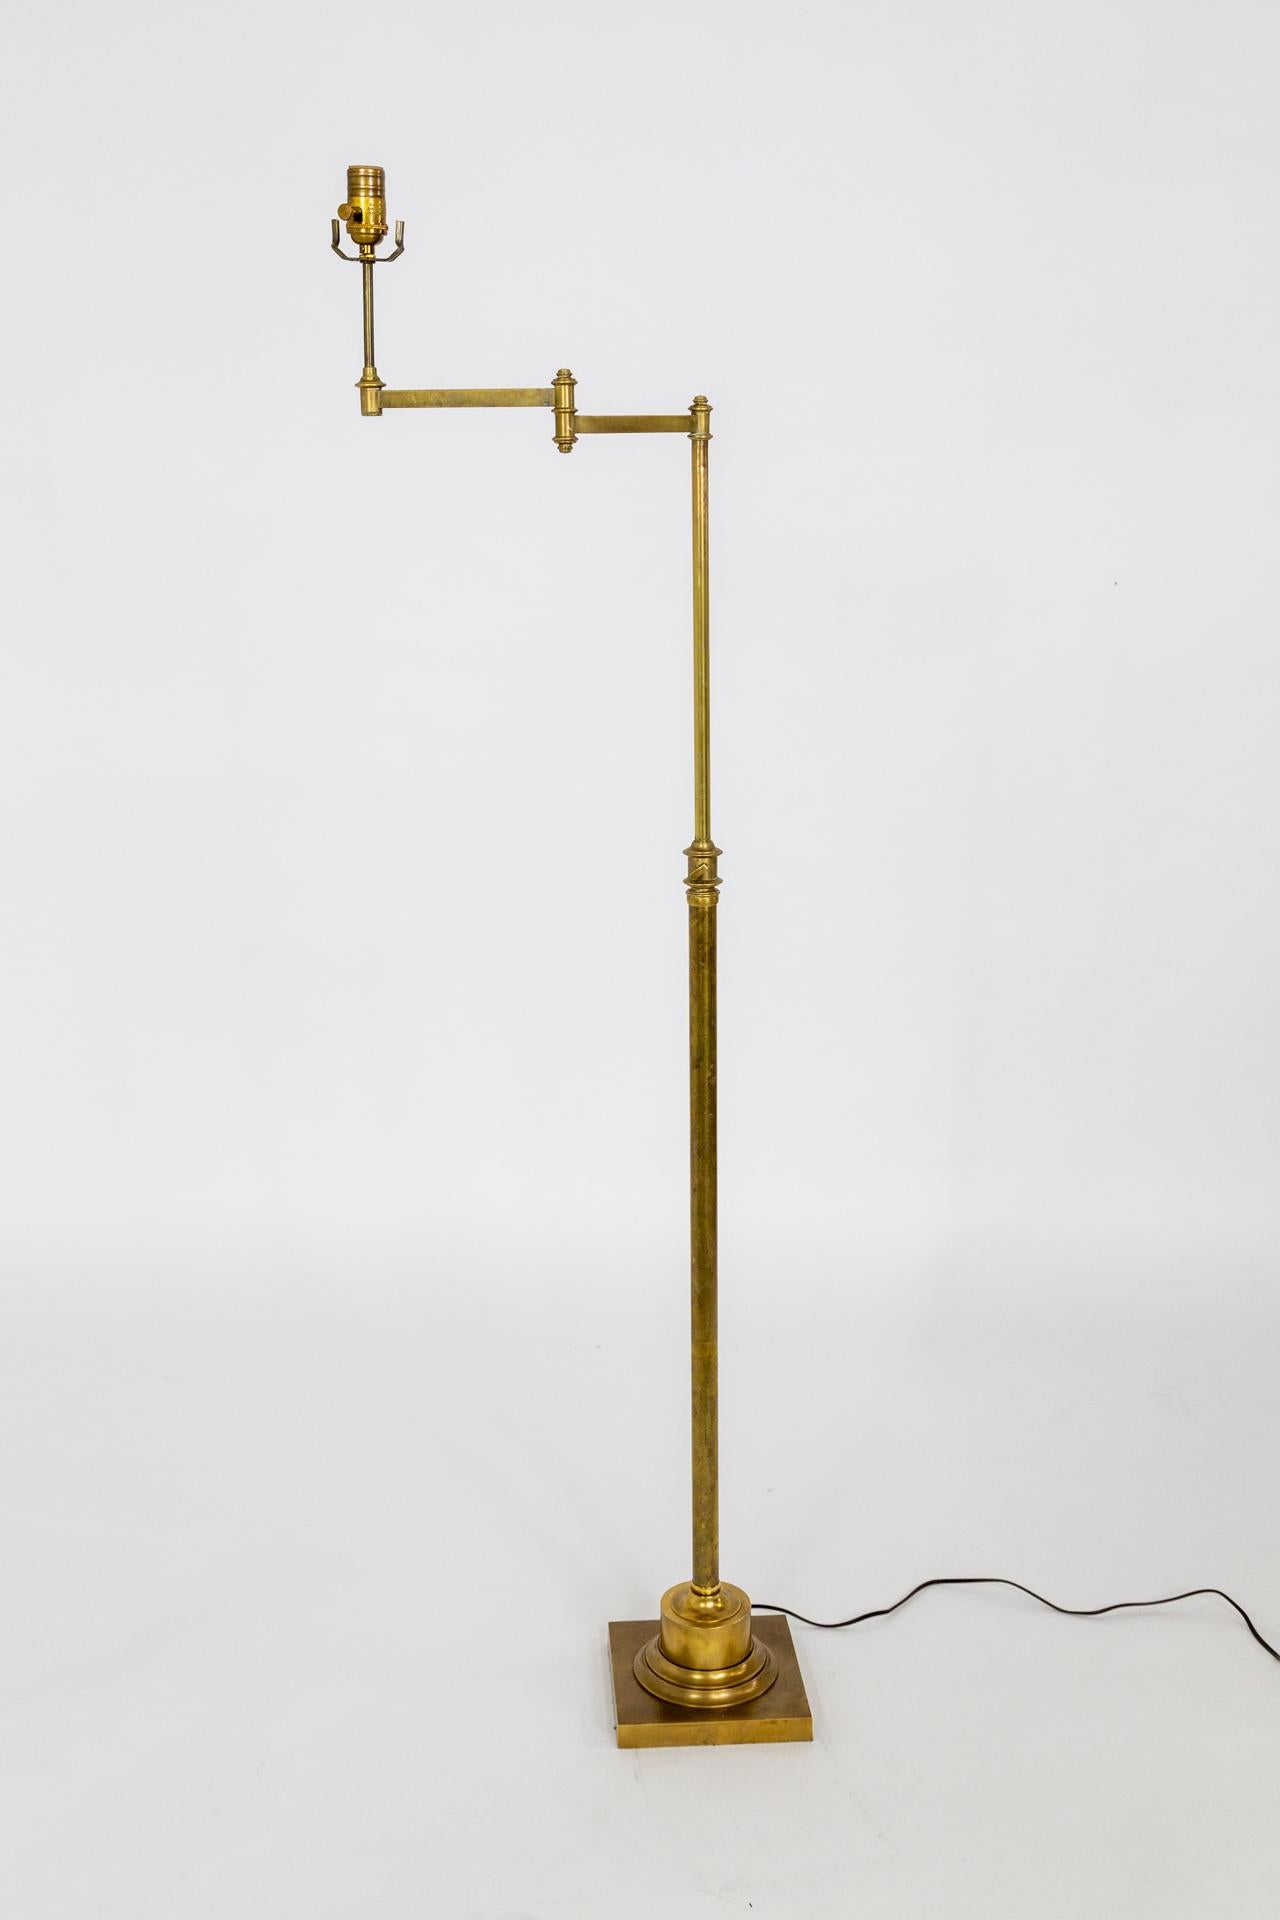 A heavy, solid brass floor lamp with telescoping height adjustment and extendable arm.  The square base has a large cylindrical cap; lovely joints and proportions.  A classy, finely crafted, versatile lamp.  Great condition and newly rewired with a